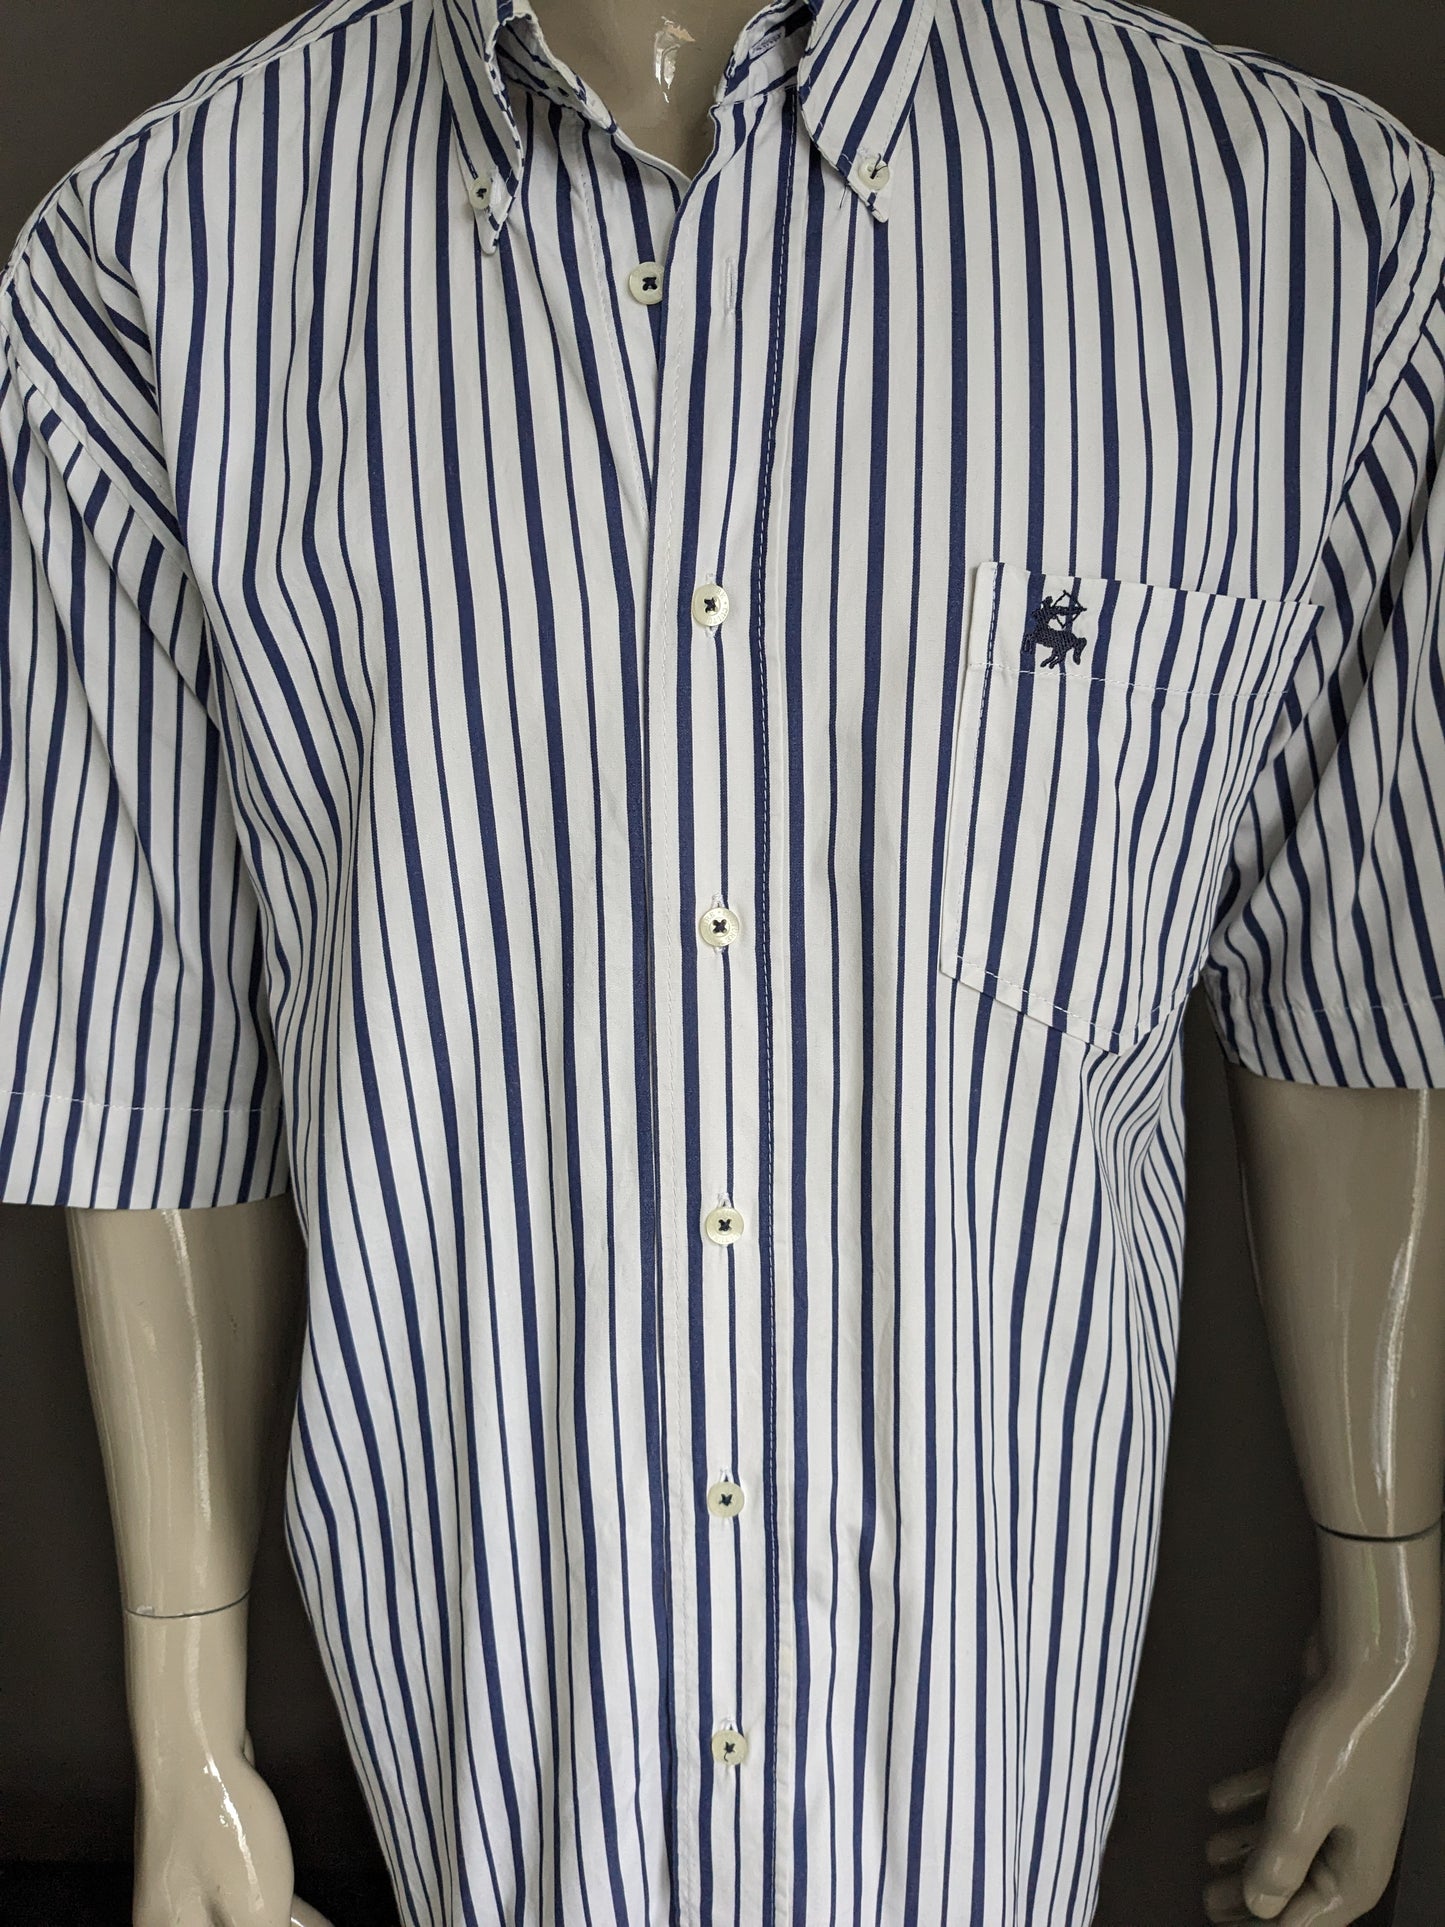 Vintage culture muscle shirt short sleeve. Blue white striped. Size XL.